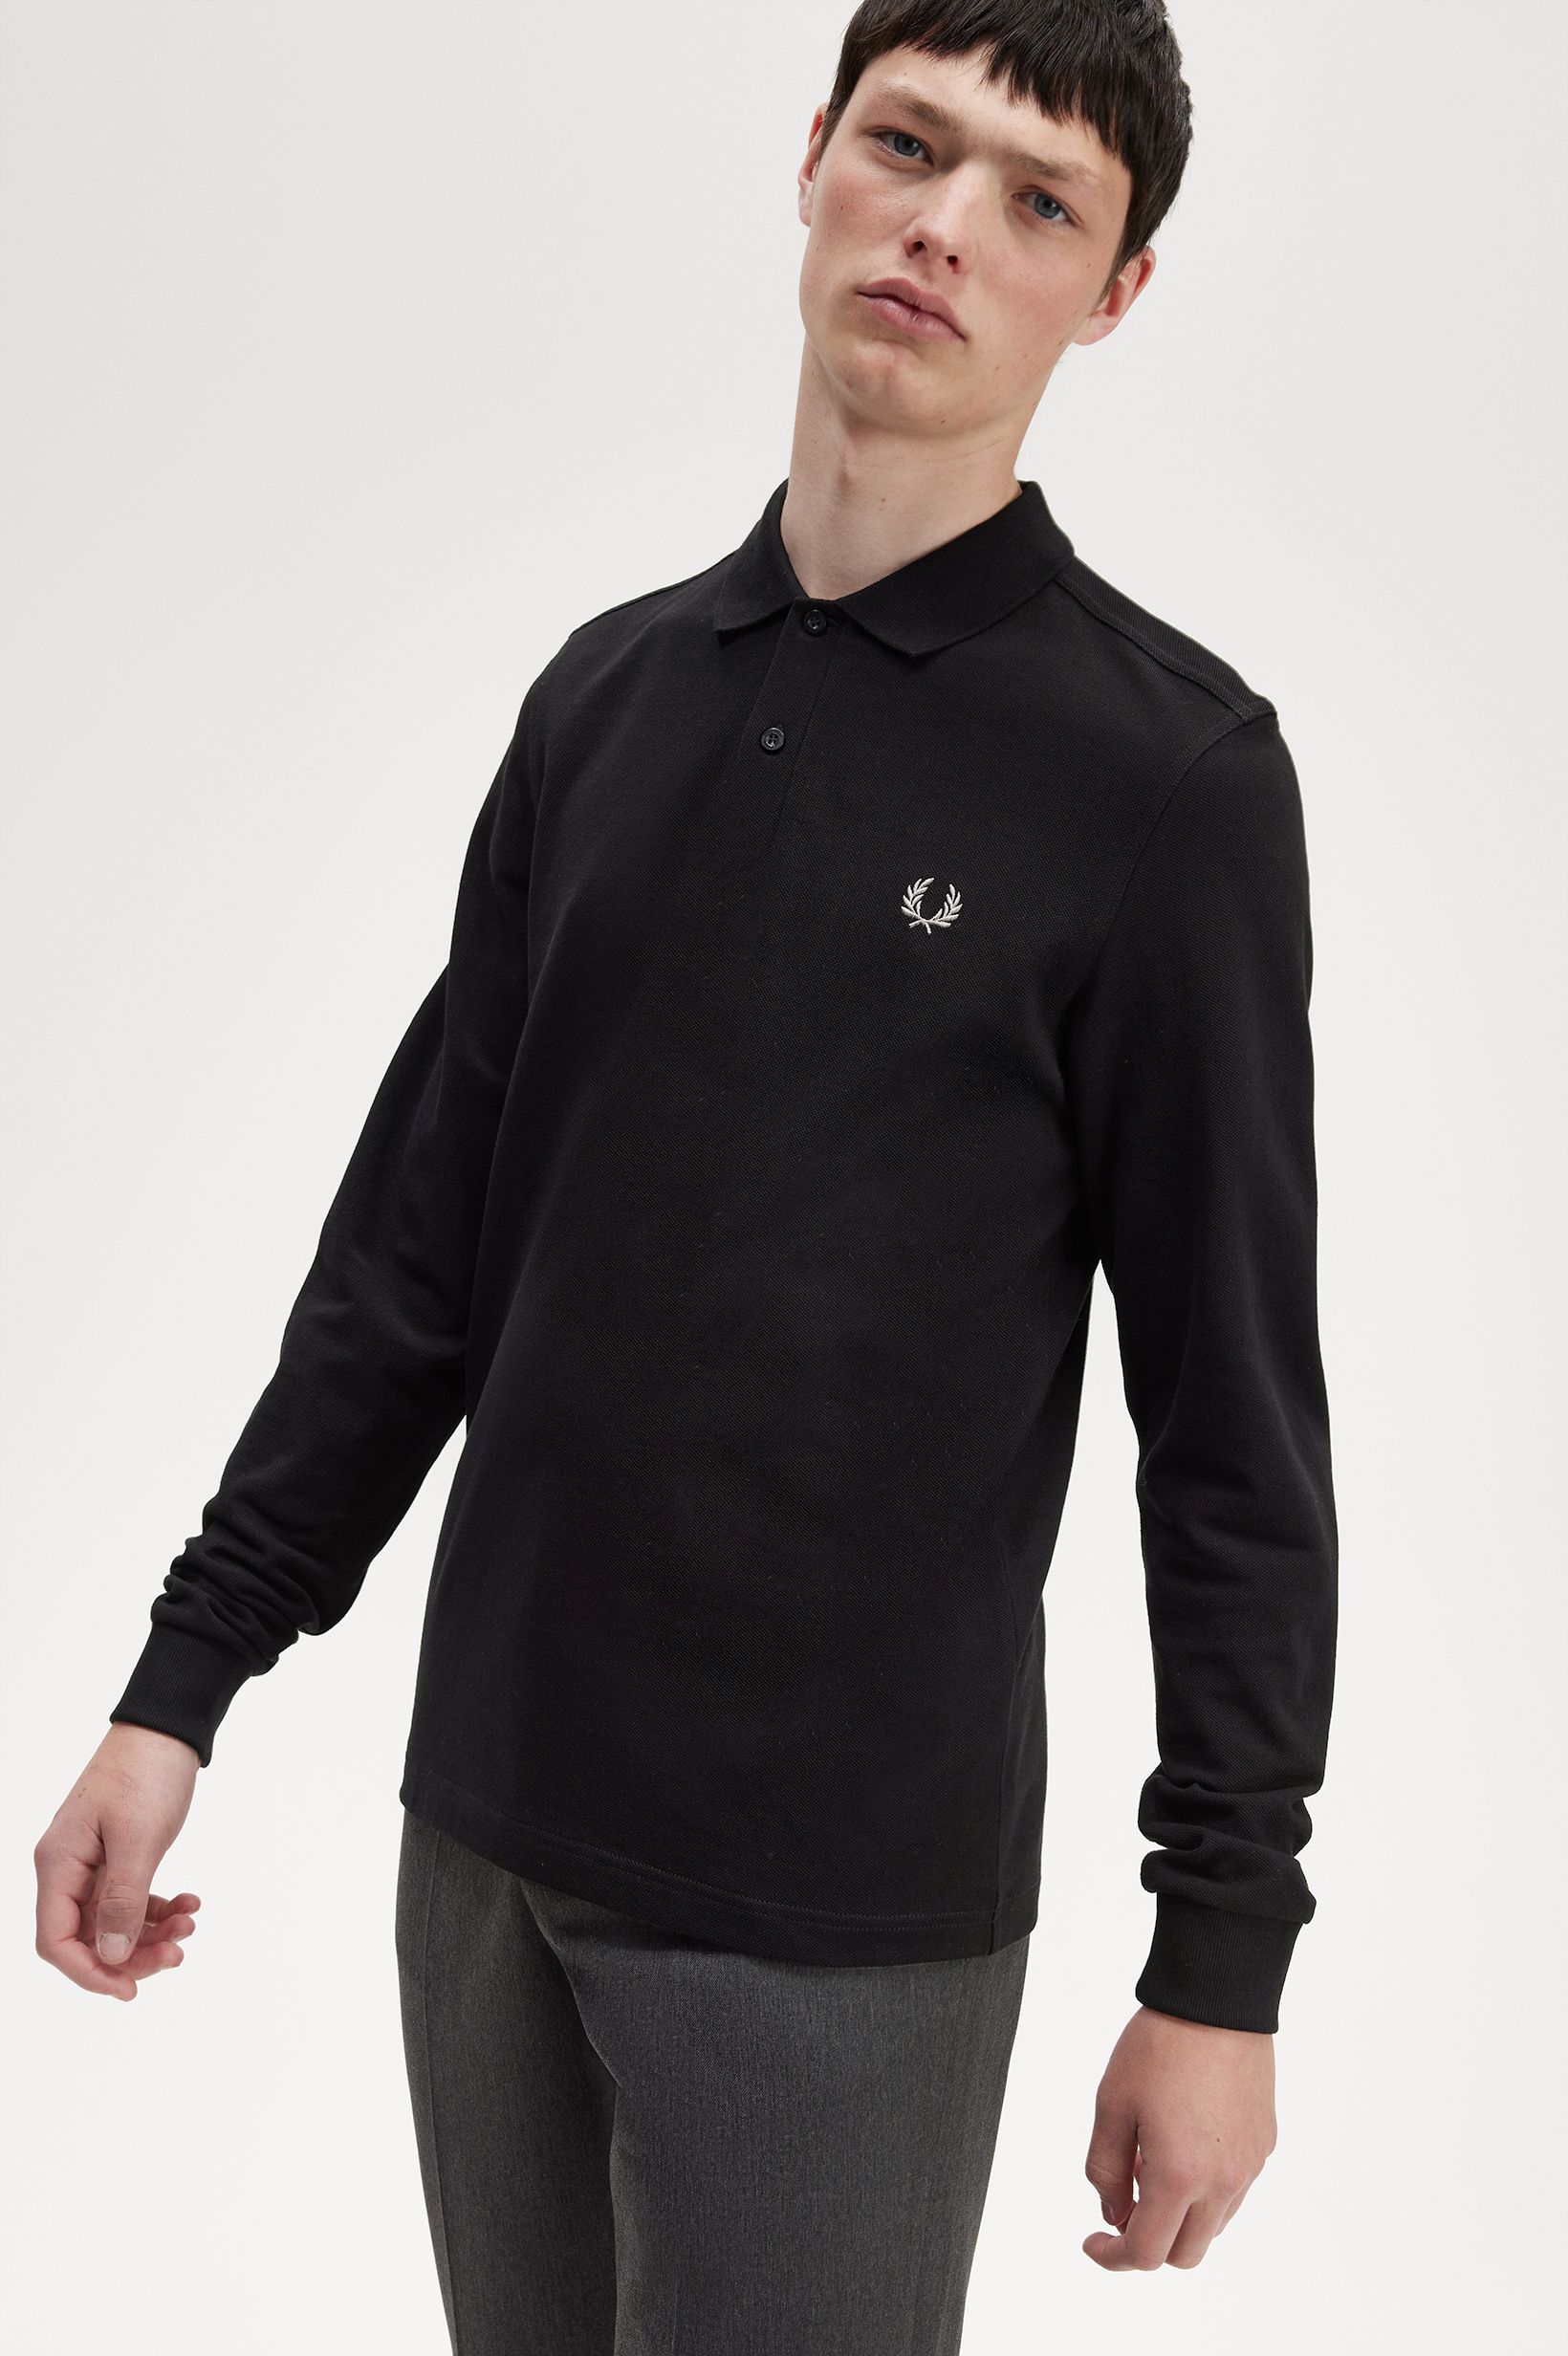 Fred Perry - LS PLAIN FRED PERRY SHIRT - Black/Chrome